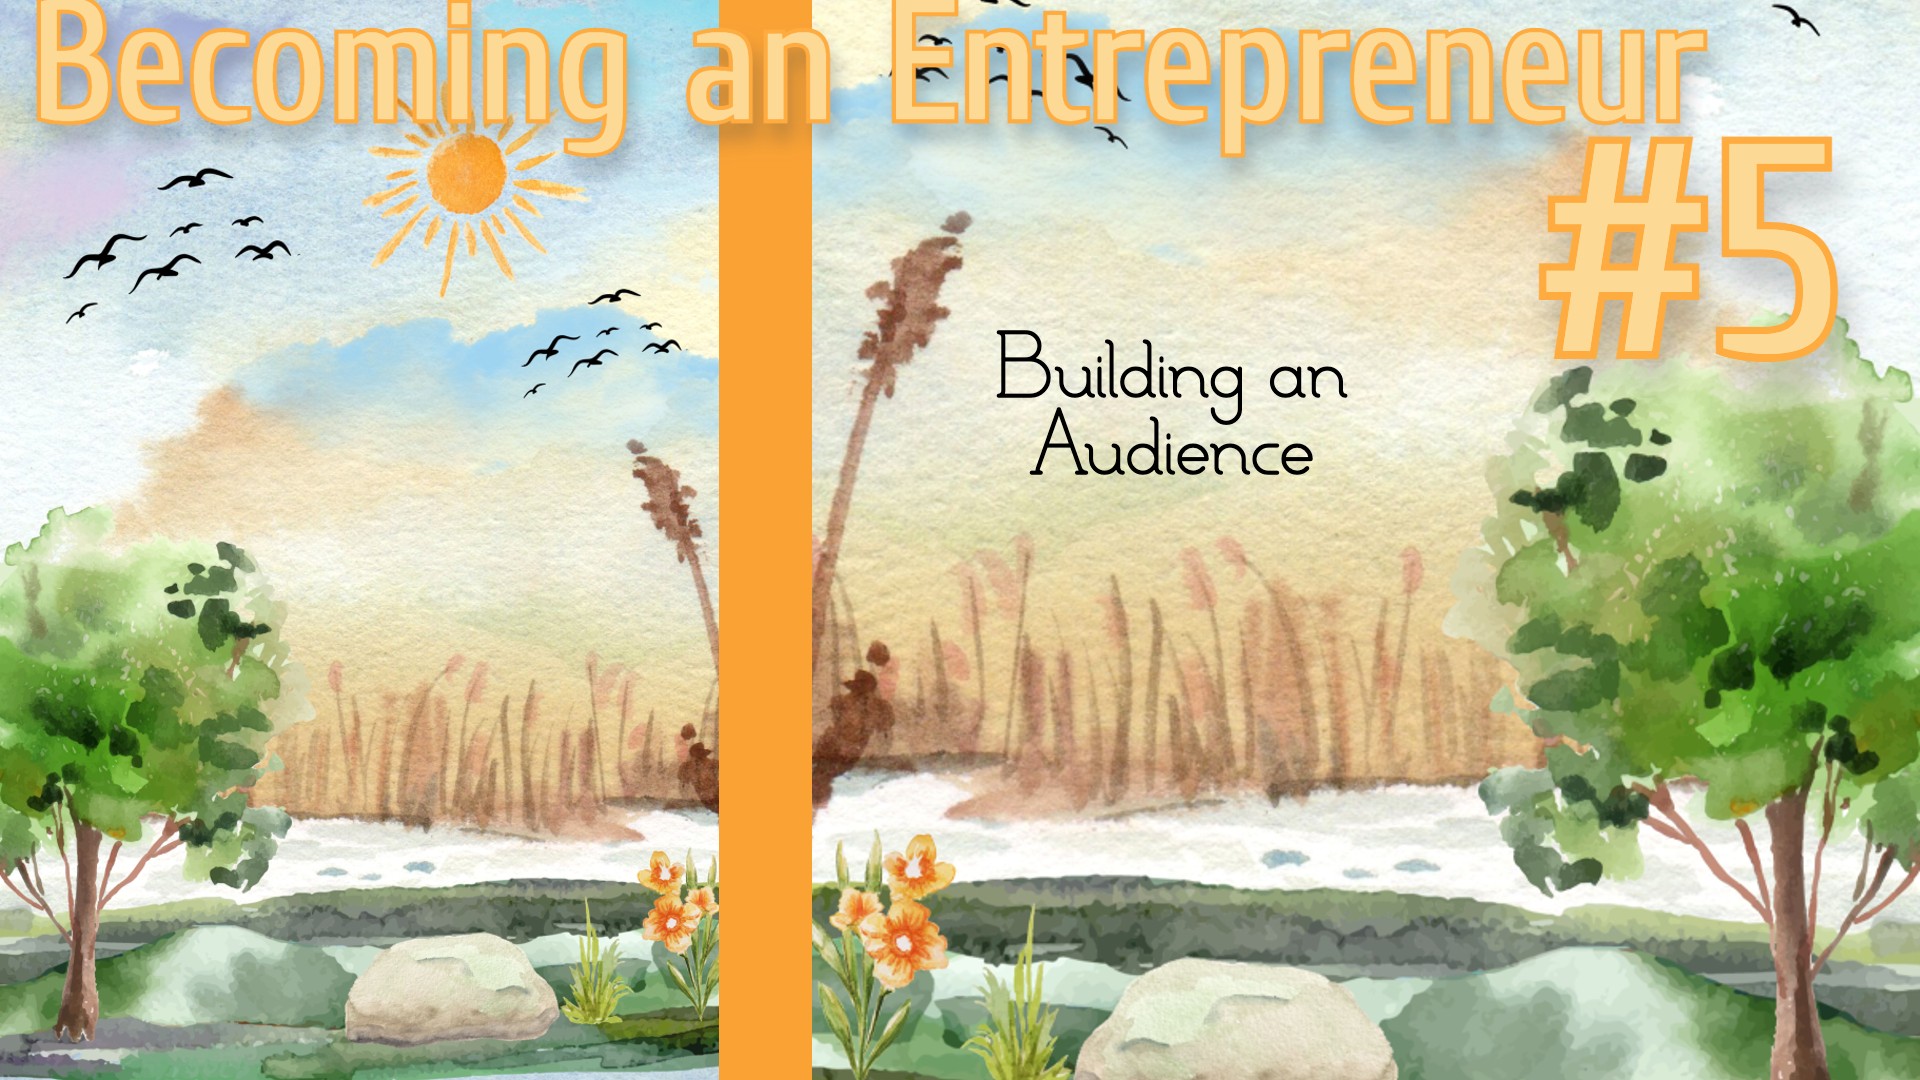 Becoming an Entrepreneur #5: Building an Audience